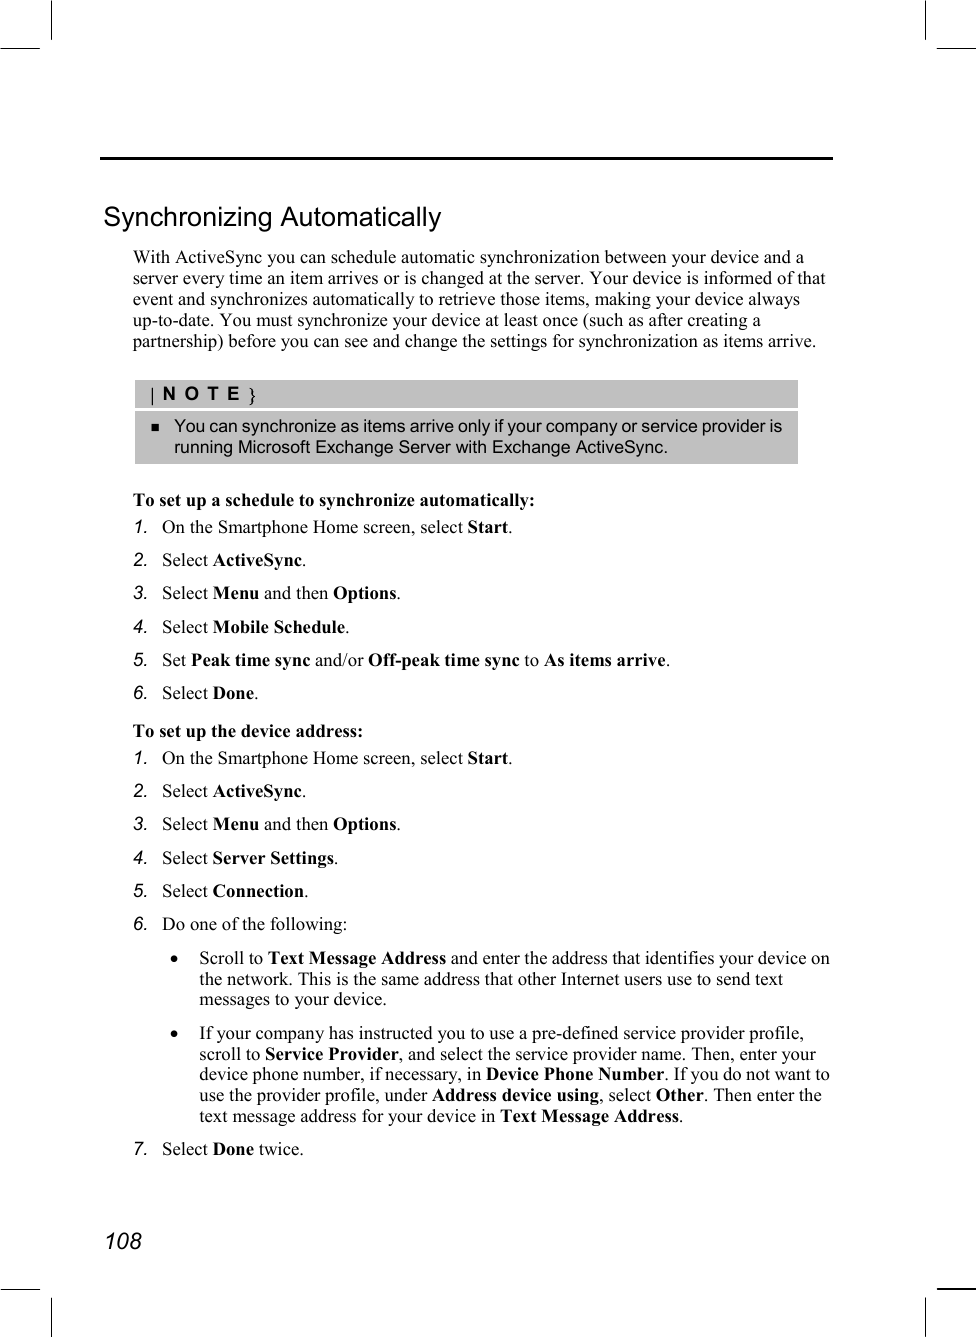  108  Synchronizing Automatically With ActiveSync you can schedule automatic synchronization between your device and a server every time an item arrives or is changed at the server. Your device is informed of that event and synchronizes automatically to retrieve those items, making your device always up-to-date. You must synchronize your device at least once (such as after creating a partnership) before you can see and change the settings for synchronization as items arrive.  |NOTE}   You can synchronize as items arrive only if your company or service provider is running Microsoft Exchange Server with Exchange ActiveSync.  To set up a schedule to synchronize automatically: 1.  On the Smartphone Home screen, select Start. 2.  Select ActiveSync. 3.  Select Menu and then Options. 4.  Select Mobile Schedule. 5.  Set Peak time sync and/or Off-peak time sync to As items arrive. 6.  Select Done. To set up the device address: 1.  On the Smartphone Home screen, select Start. 2.  Select ActiveSync. 3.  Select Menu and then Options. 4.  Select Server Settings. 5.  Select Connection. 6.  Do one of the following: •  Scroll to Text Message Address and enter the address that identifies your device on the network. This is the same address that other Internet users use to send text messages to your device. •  If your company has instructed you to use a pre-defined service provider profile, scroll to Service Provider, and select the service provider name. Then, enter your device phone number, if necessary, in Device Phone Number. If you do not want to use the provider profile, under Address device using, select Other. Then enter the text message address for your device in Text Message Address. 7.  Select Done twice. 